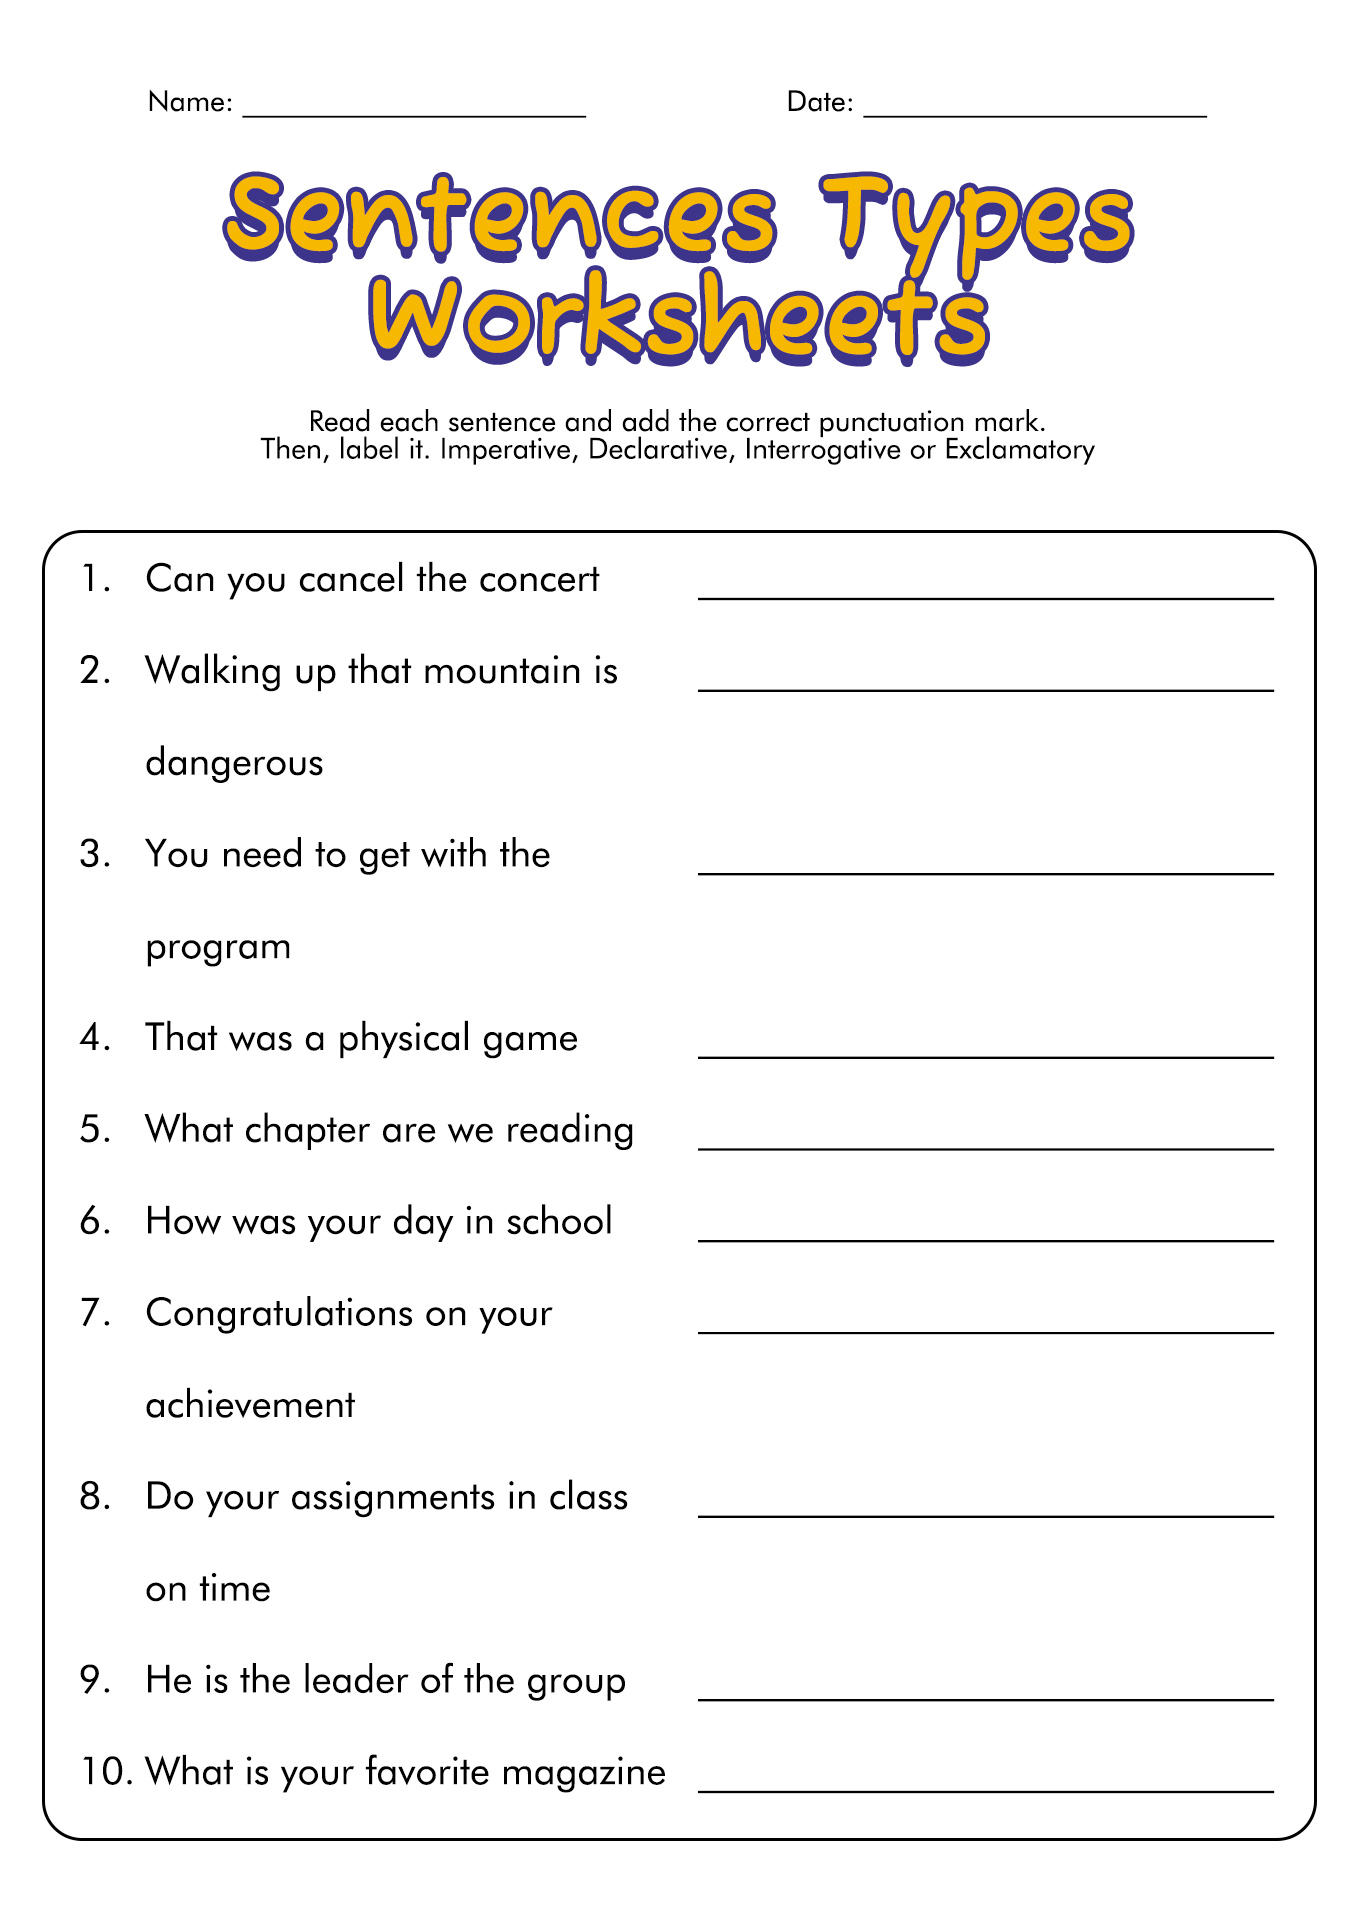 11 Best Images Of Four Types Of Sentences Worksheets Four Sentence Types Worksheets Correct 